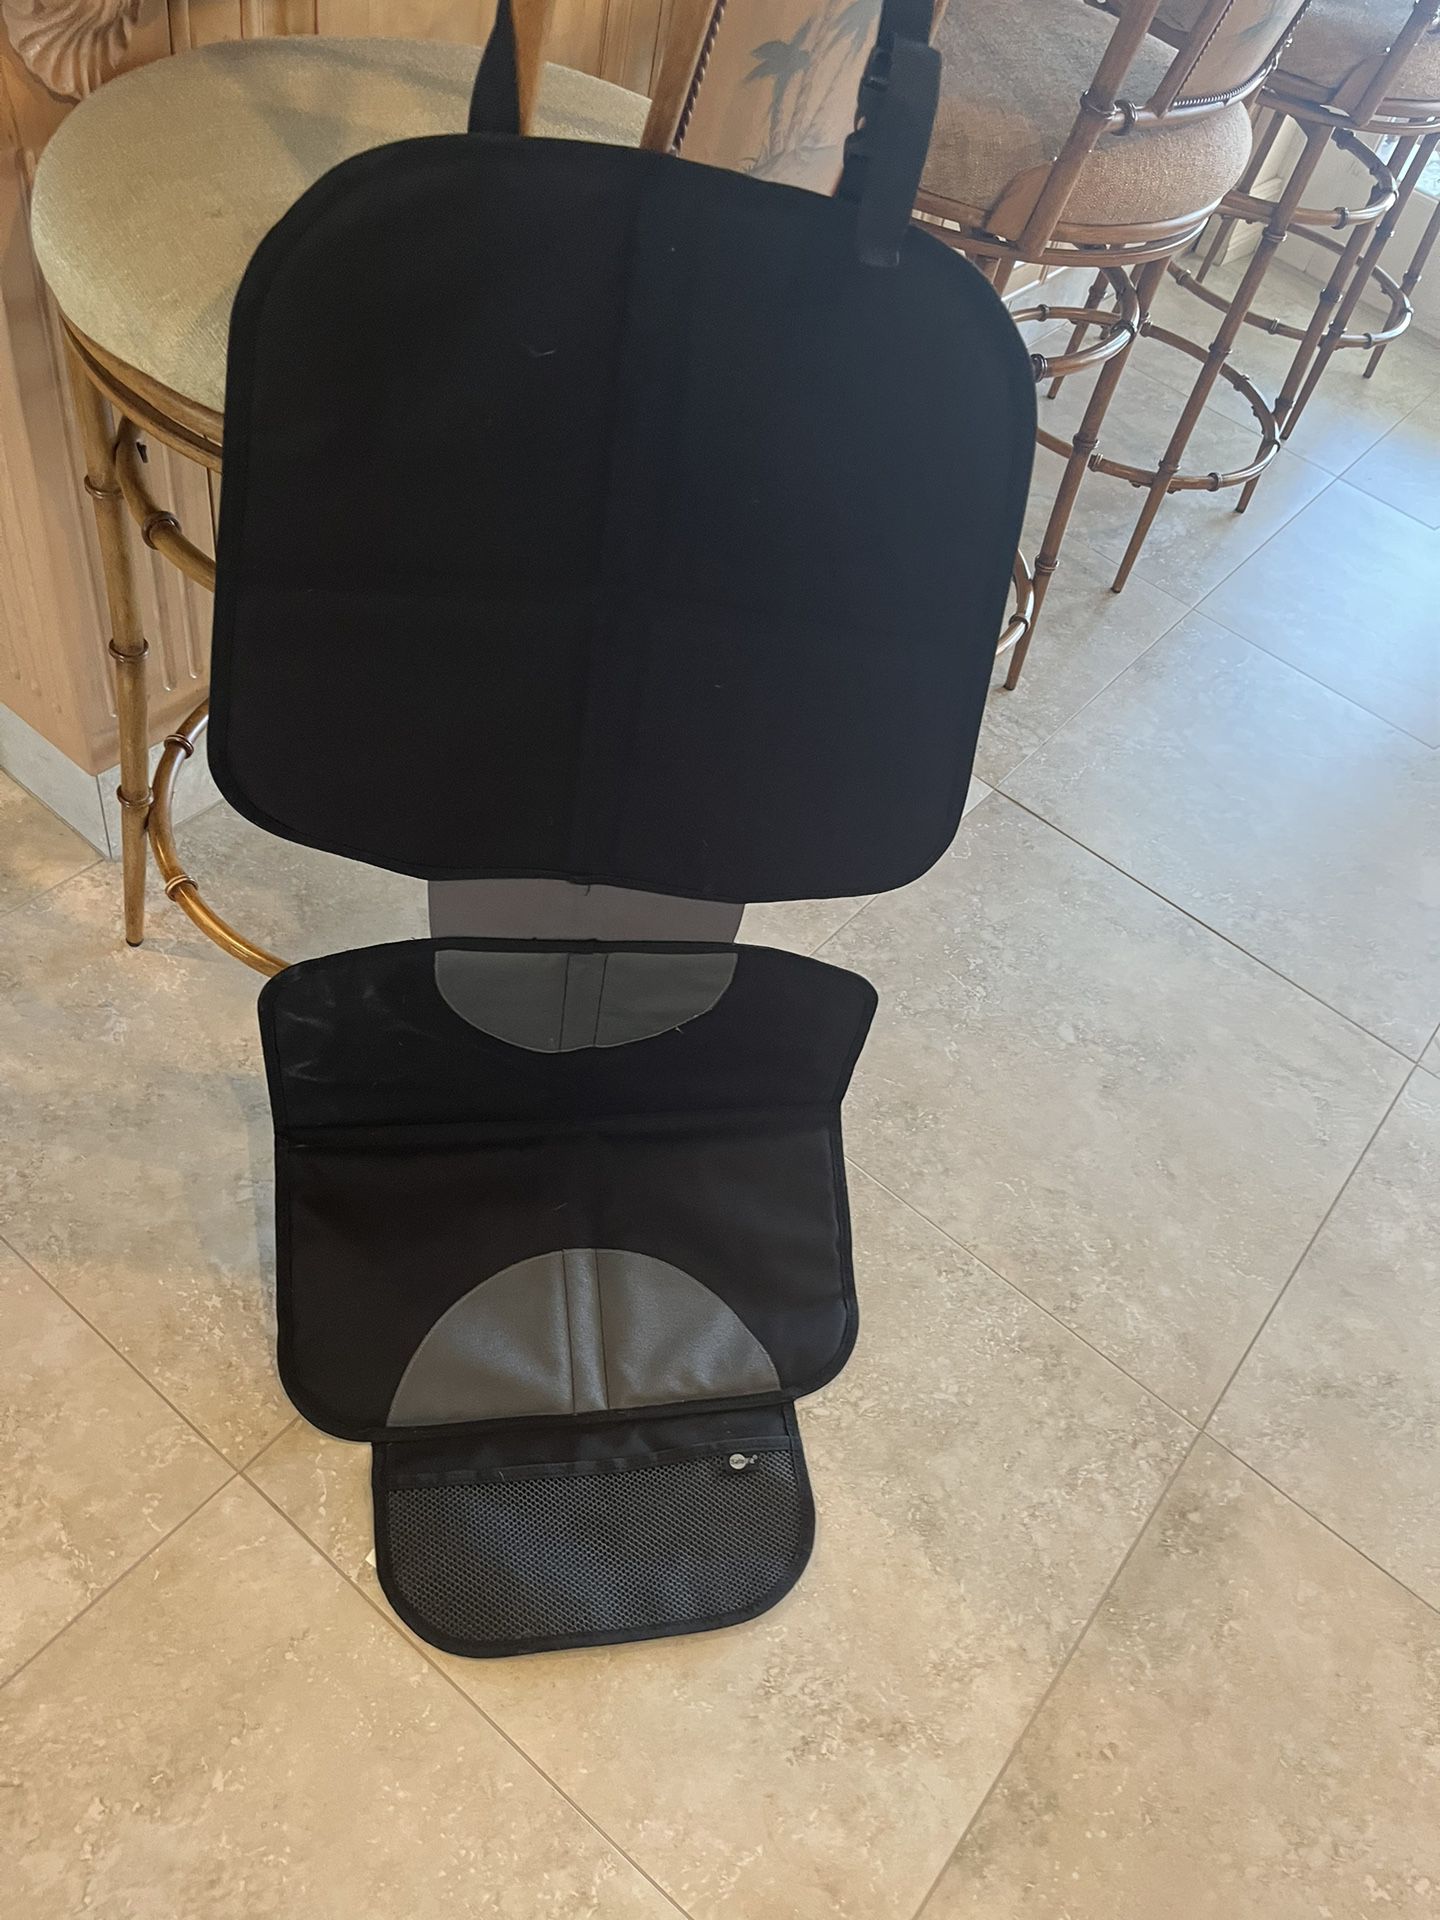 Seat protectors for car seat or booster seat